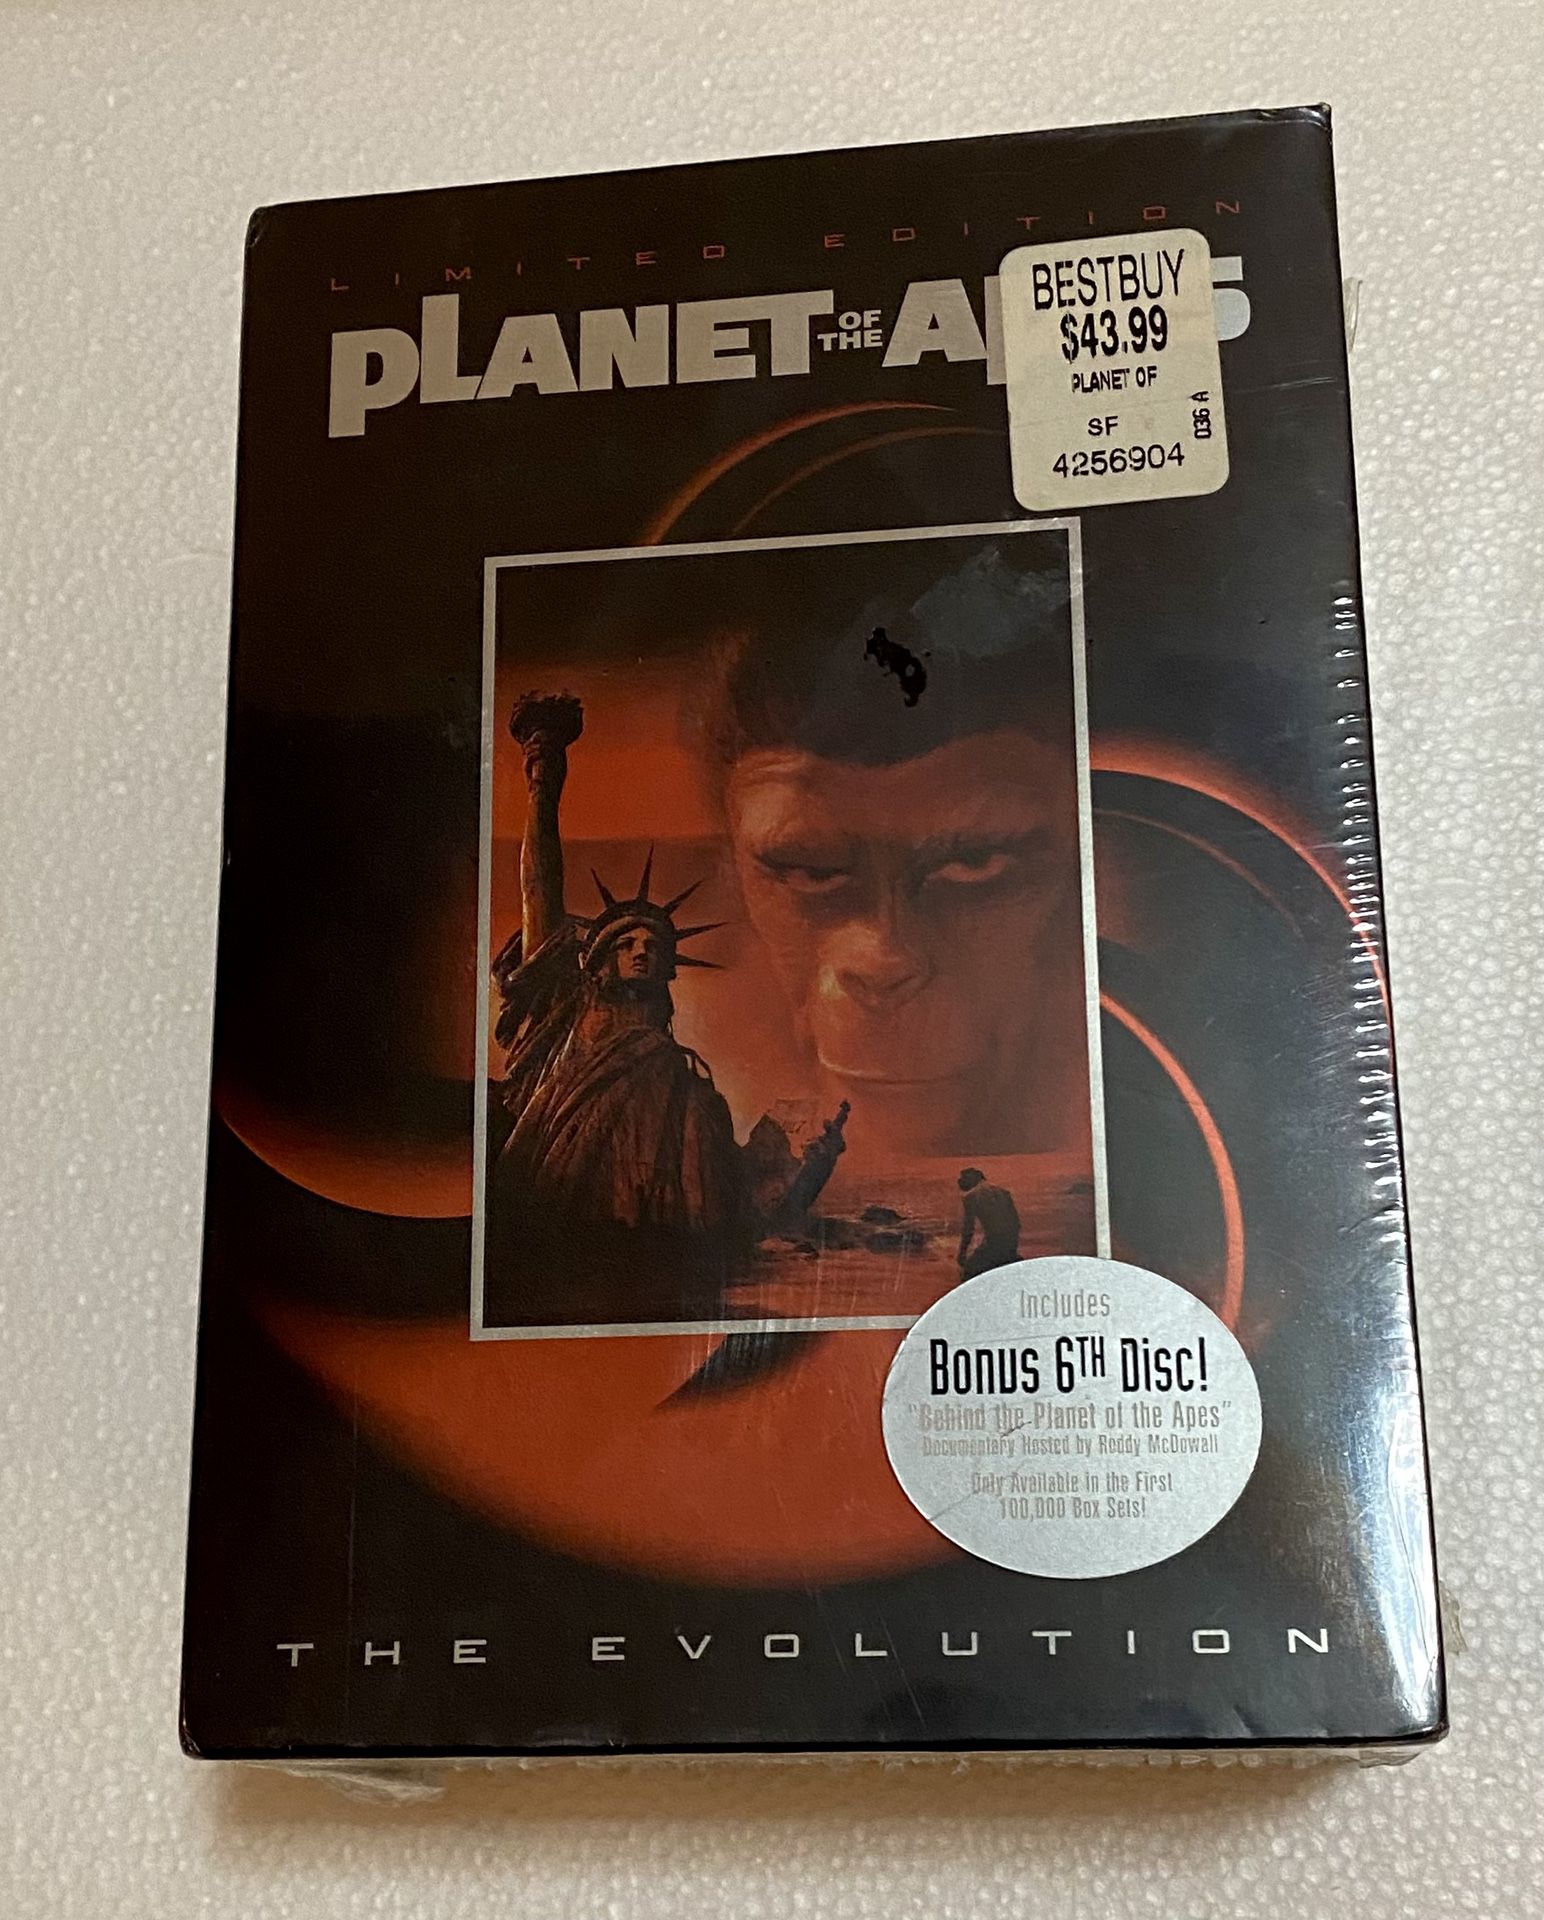 PLANET OF THE APES The Evolution (DVD, 2000, 6-Disc Set) Limited Edition Brand New SEALED